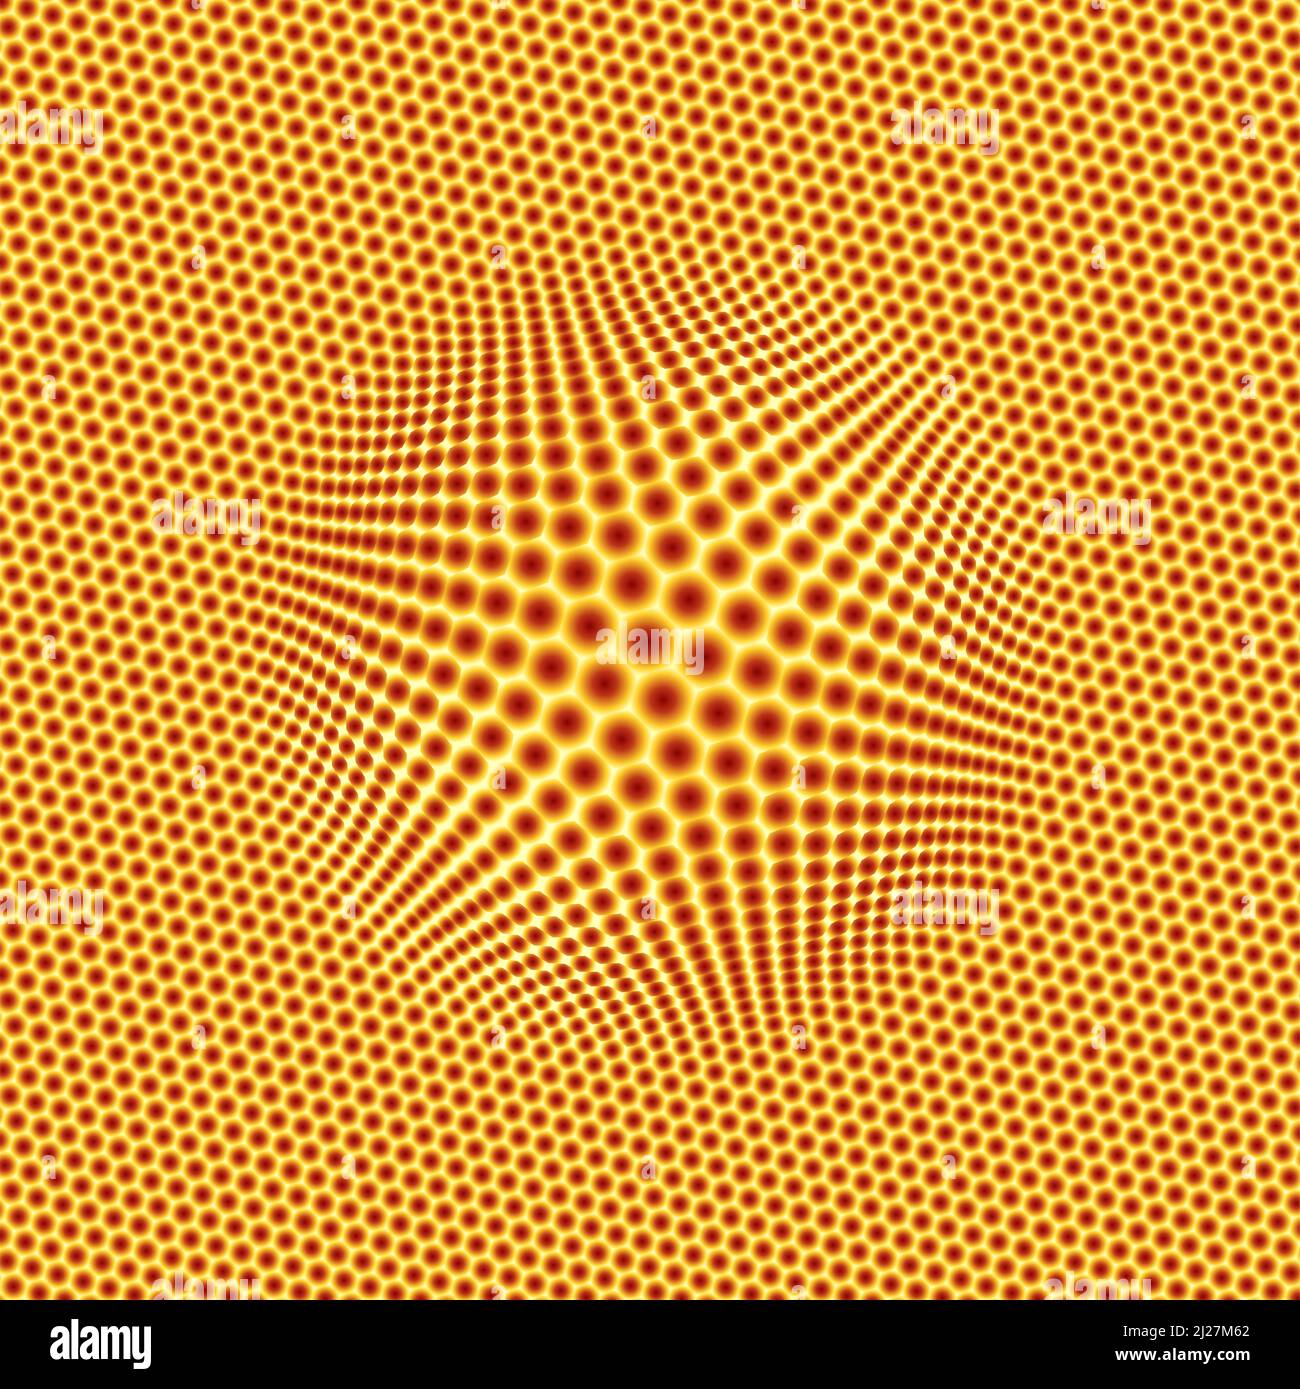 Abstract geometric pattern of hexagons magnified in the middle Stock Photo